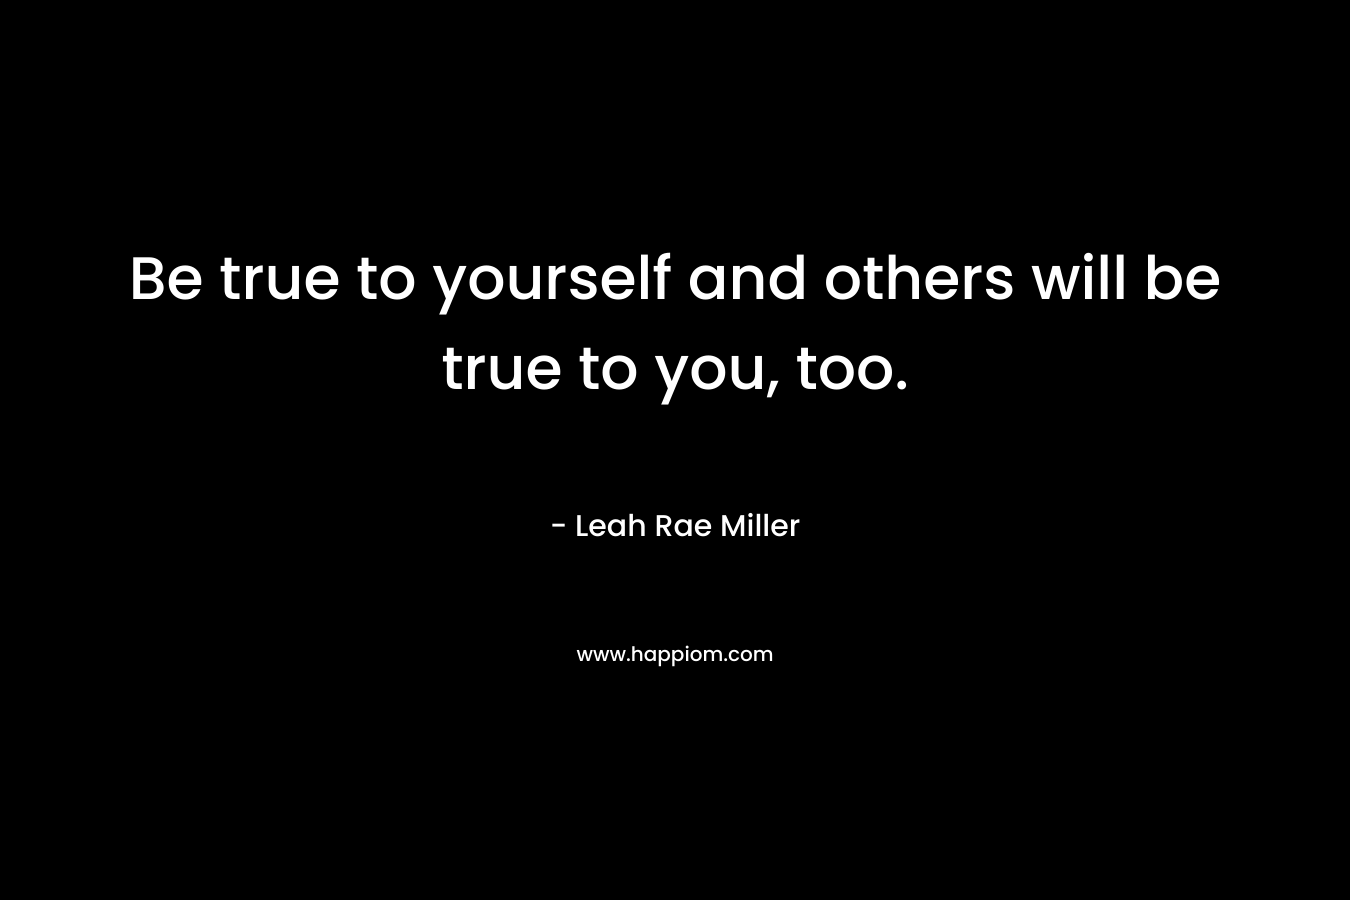 Be true to yourself and others will be true to you, too. – Leah Rae Miller